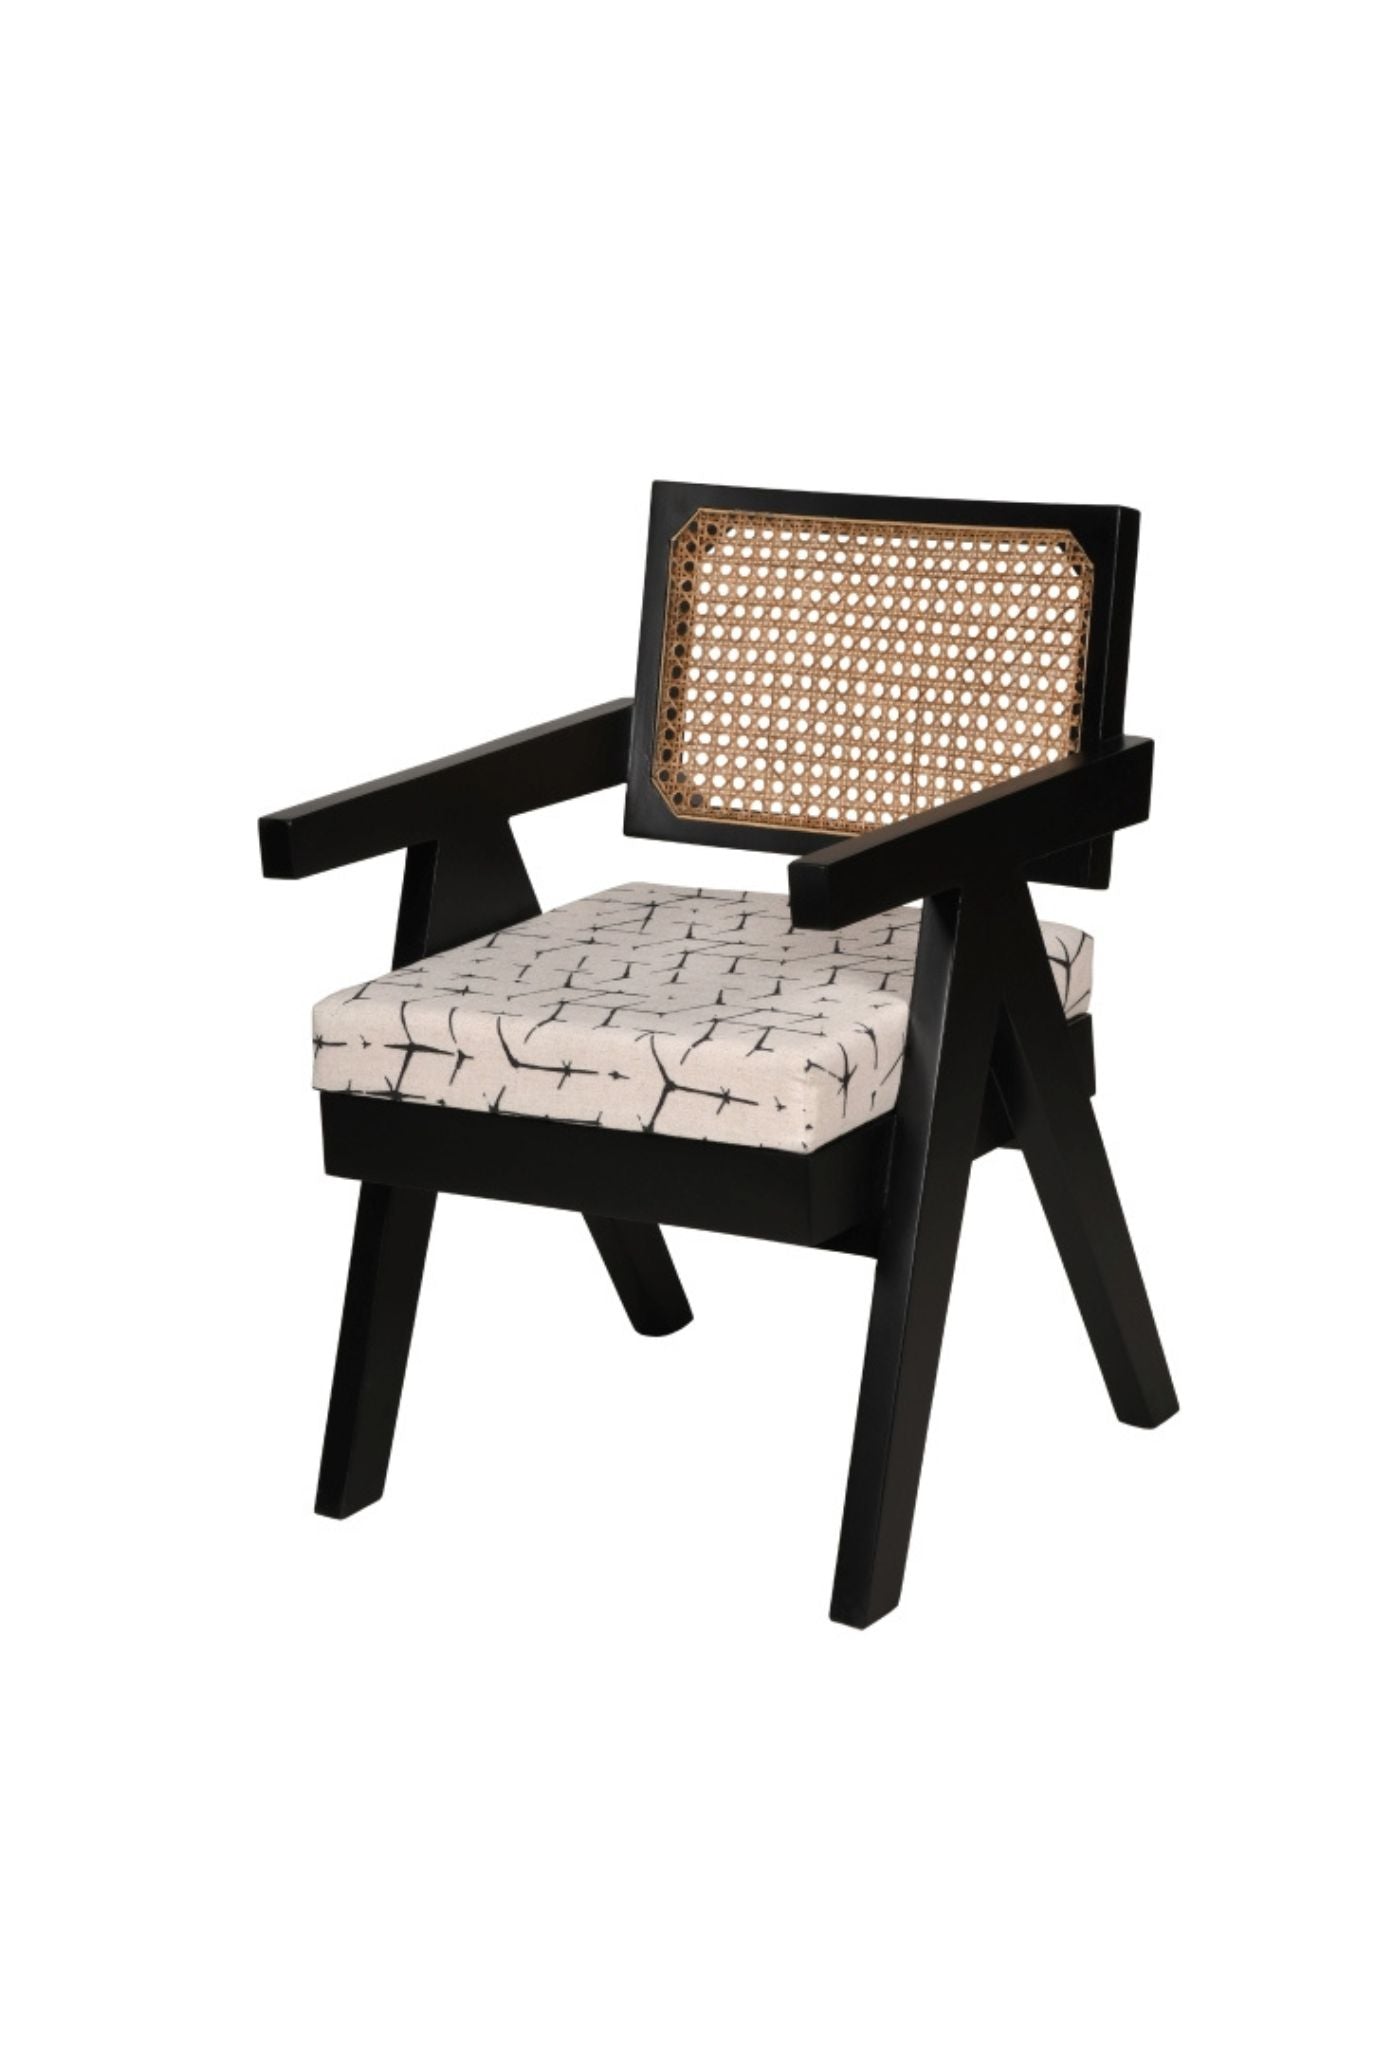 Chandigarh Chair (SHIPPING ONLY IN INDIA)